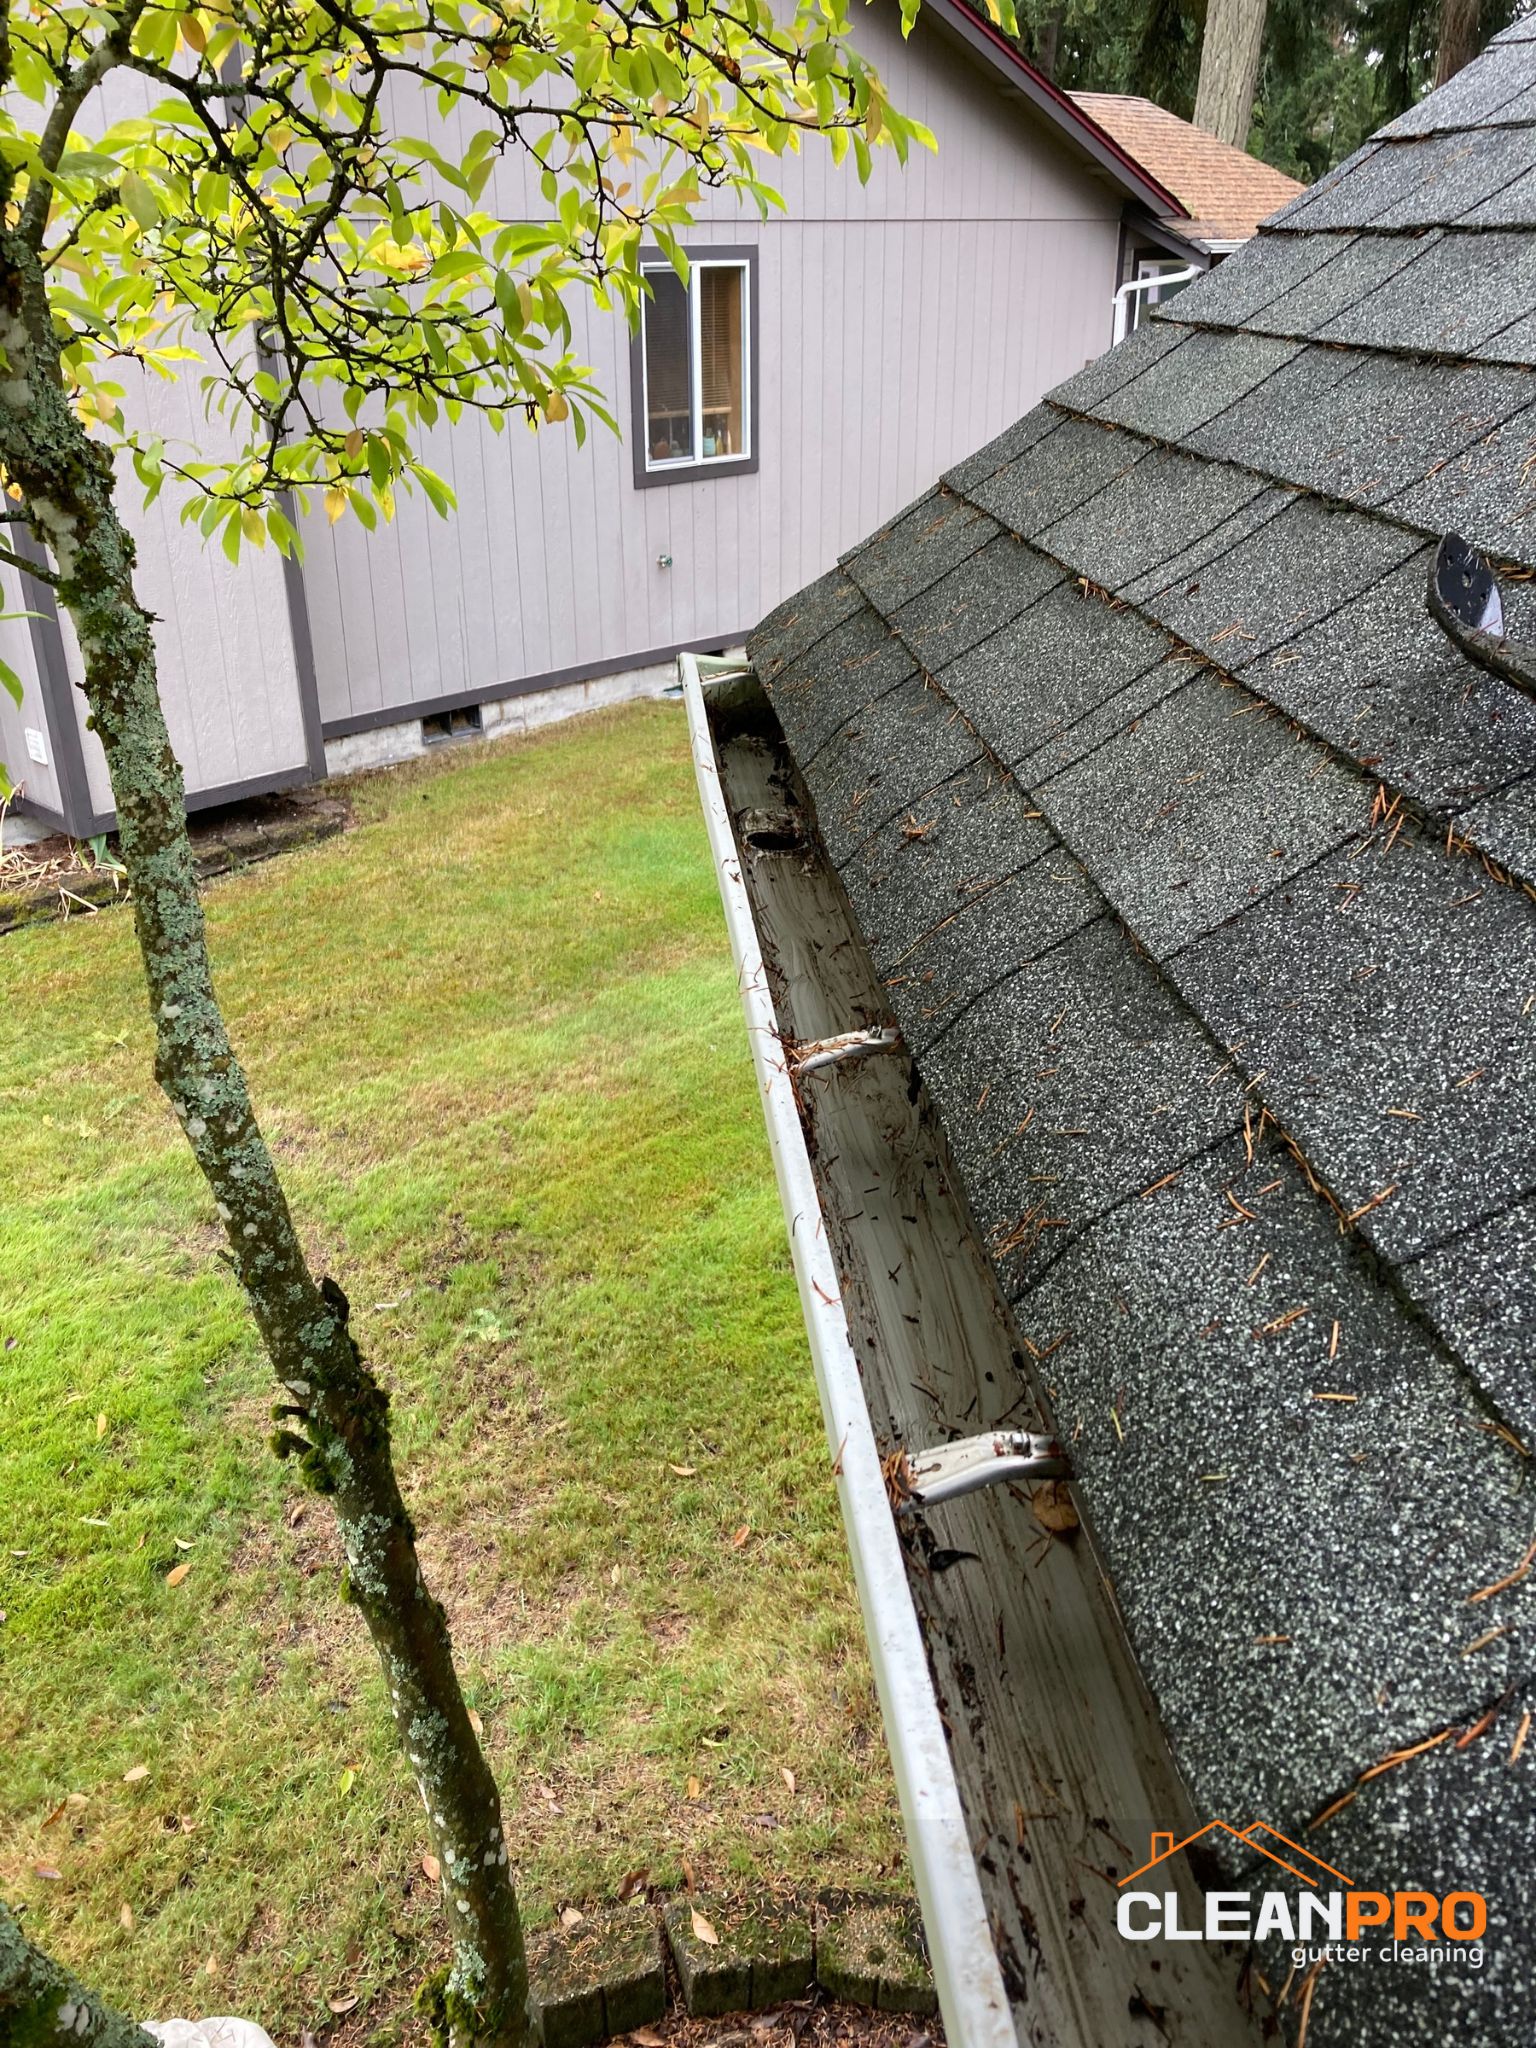 Quality Gutter Cleaning in Cary NC